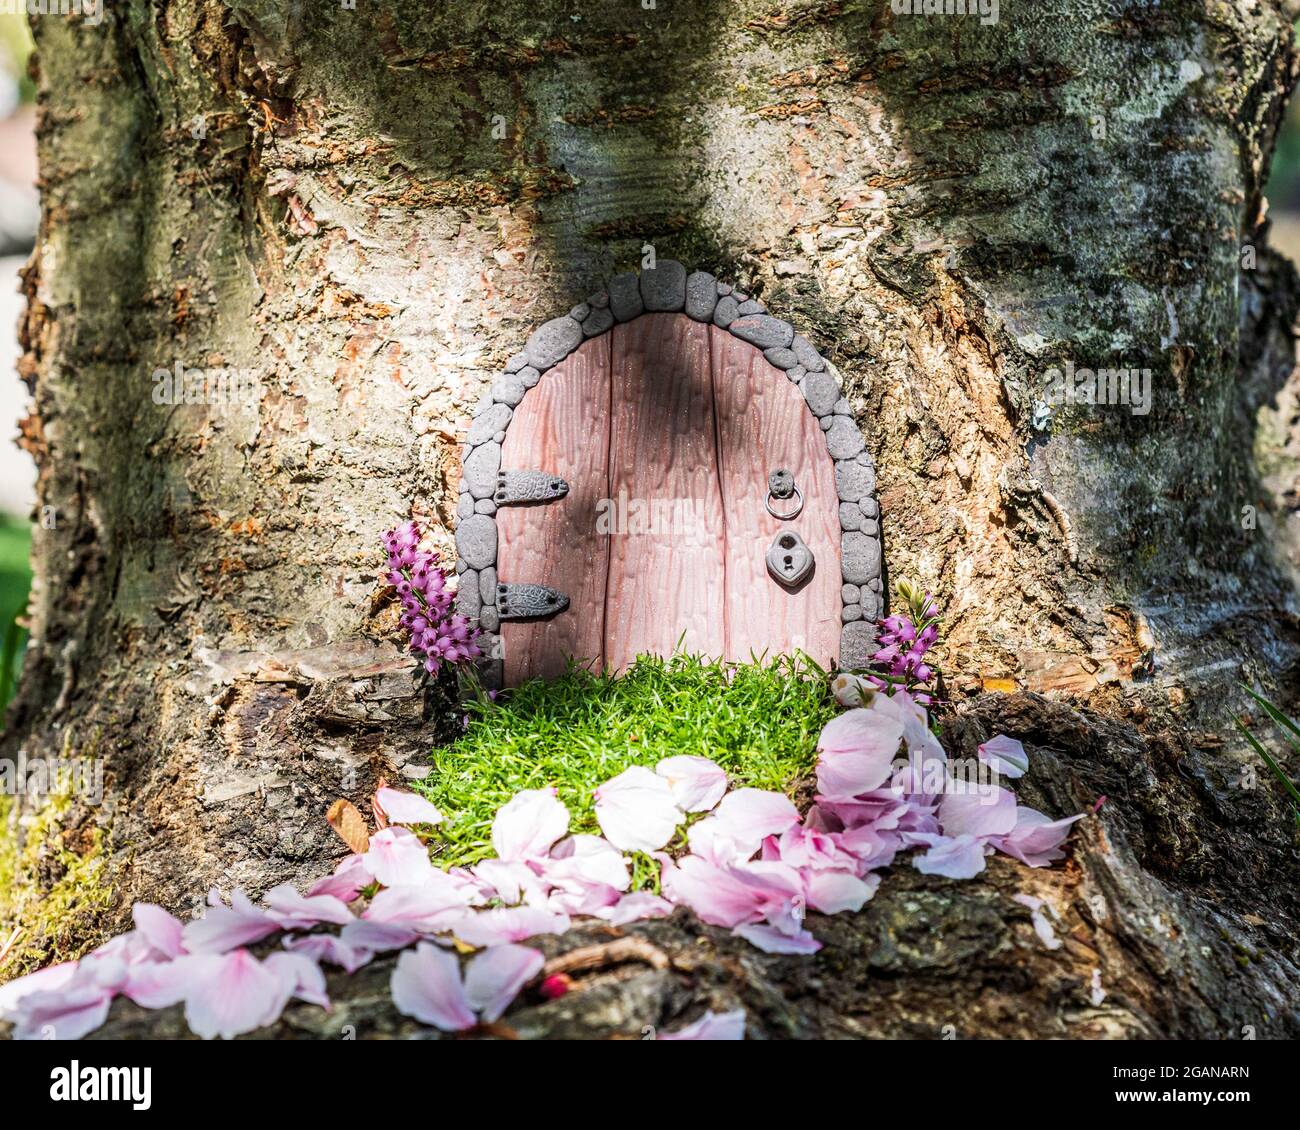 Little fairy tale door made from clay in a tree trunk with pink petals. Stock Photo